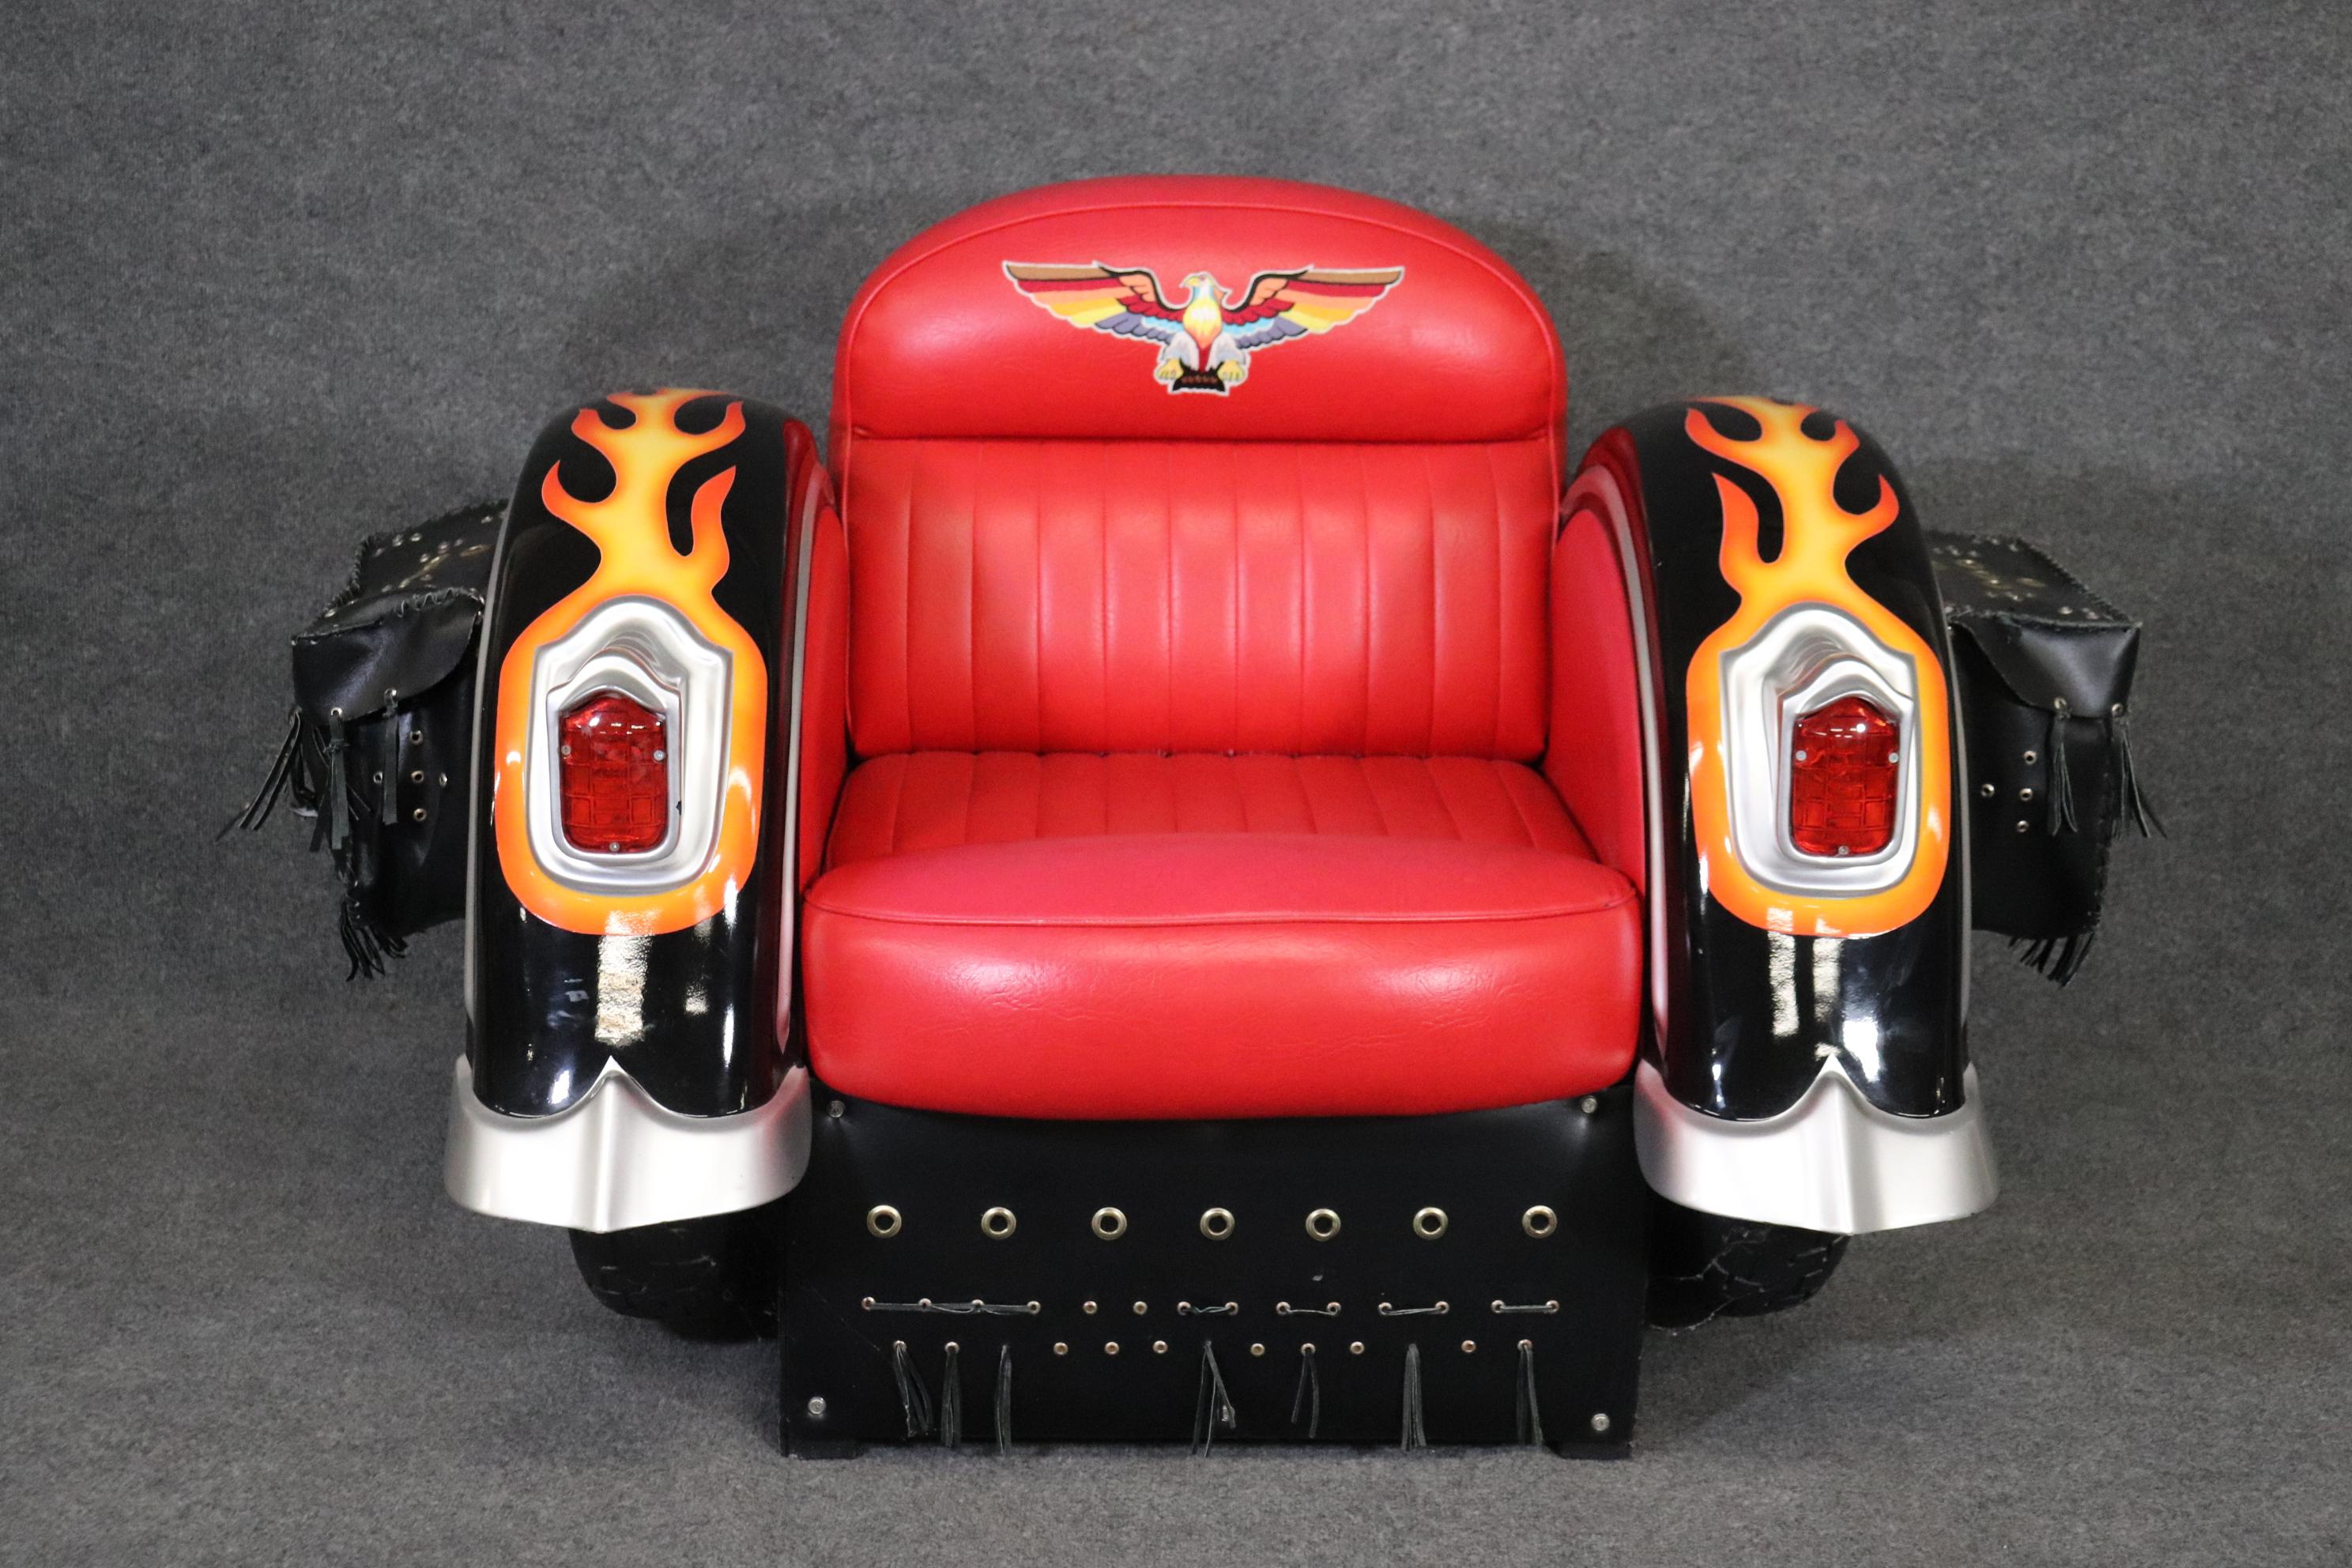 This is a fantastic and fun design for a club chair. The chair lights up and is very good condition as its not very old. The chair is fitted with a red faux leather seat and designed to look like a vintage Indian or Harley motorcycle and is signed